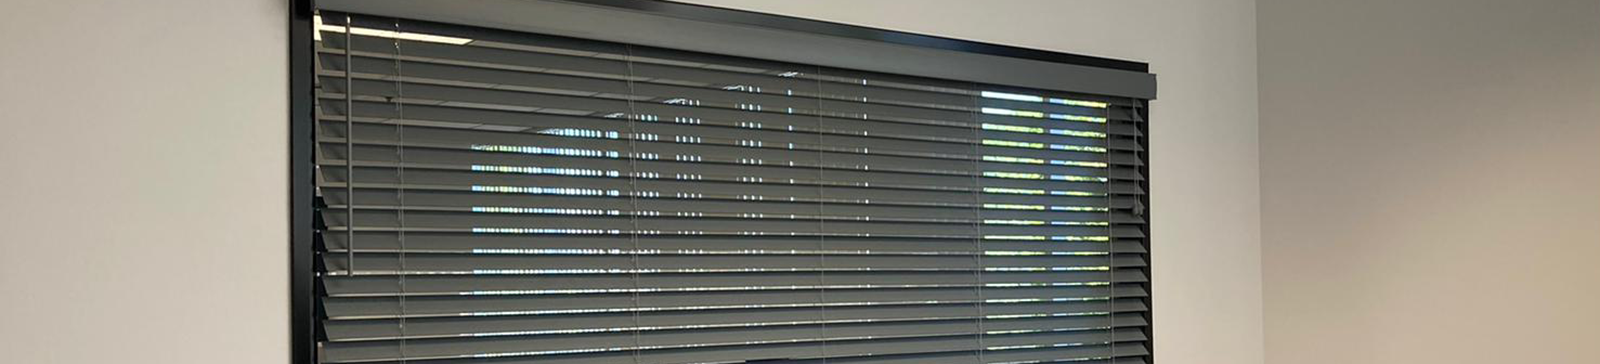 Horizontal Blinds for Office Spaces in San Juan Capistrano